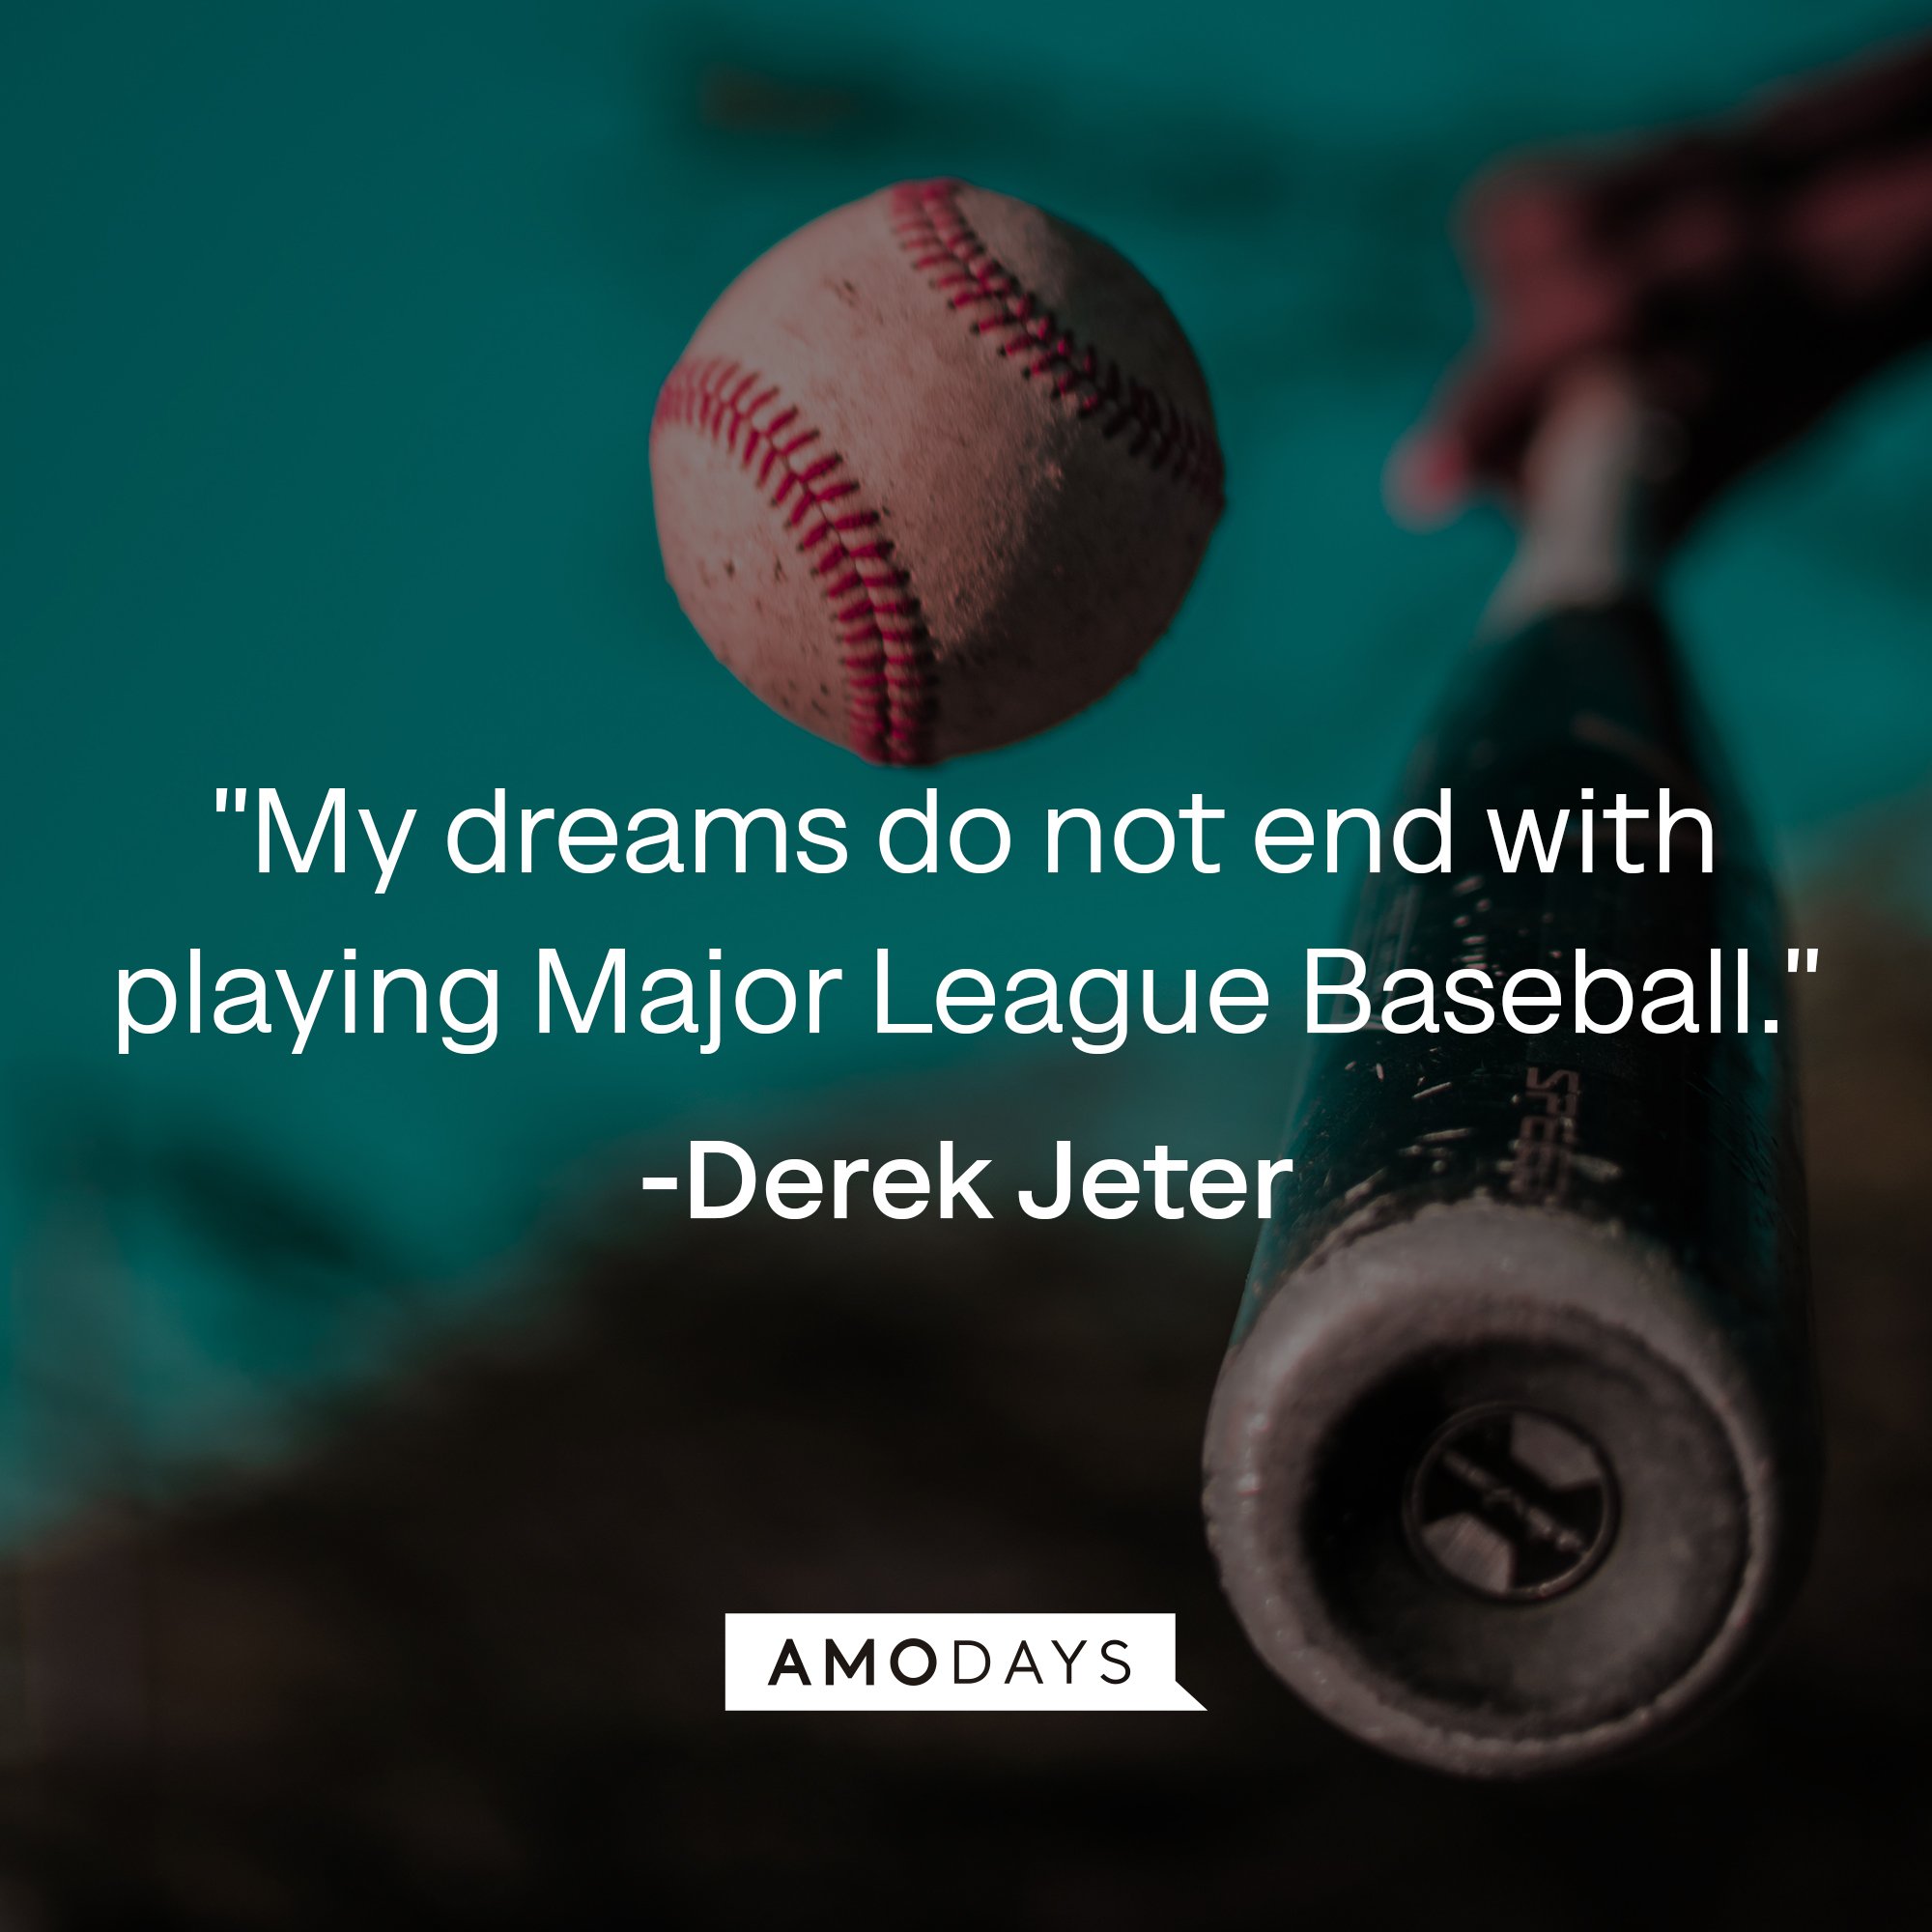 Derek Jeter's quote: "My dreams do not end with playing Major League Baseball." | Image: AmoDays